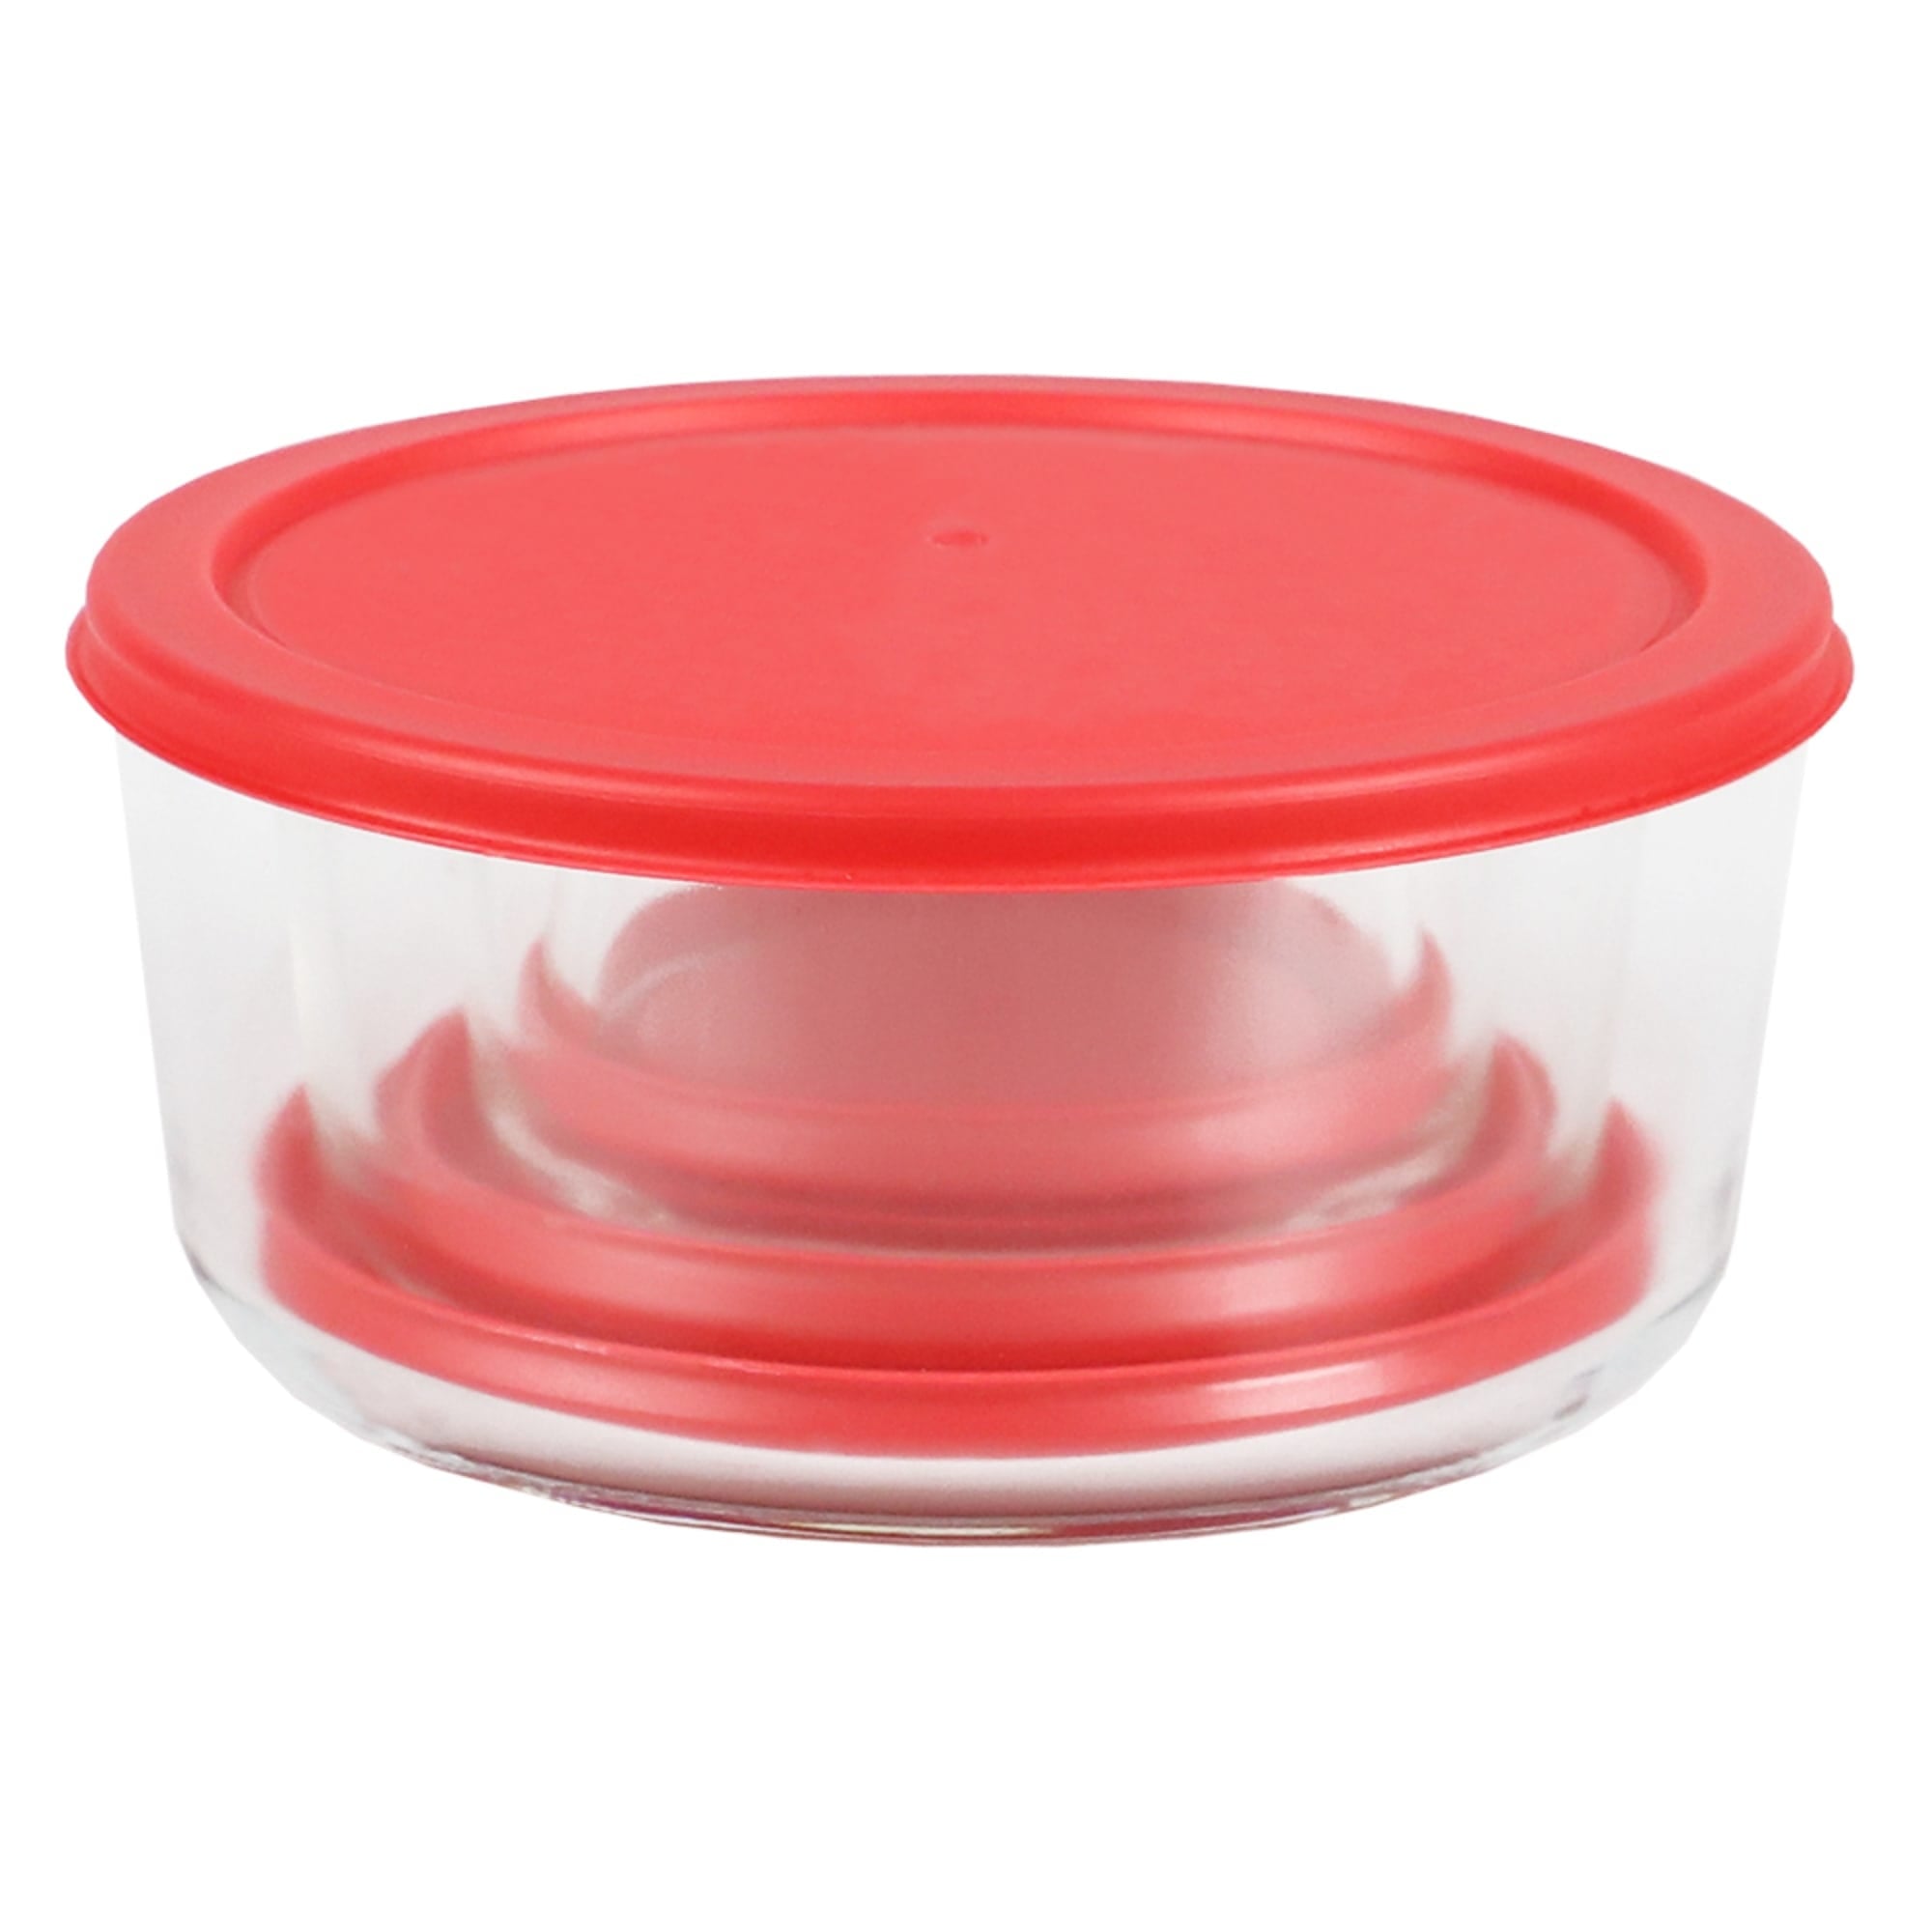 Home Basics Round 8 oz. Borosilicate Glass Food Storage Container with Red Lid $2 EACH, CASE PACK OF 12